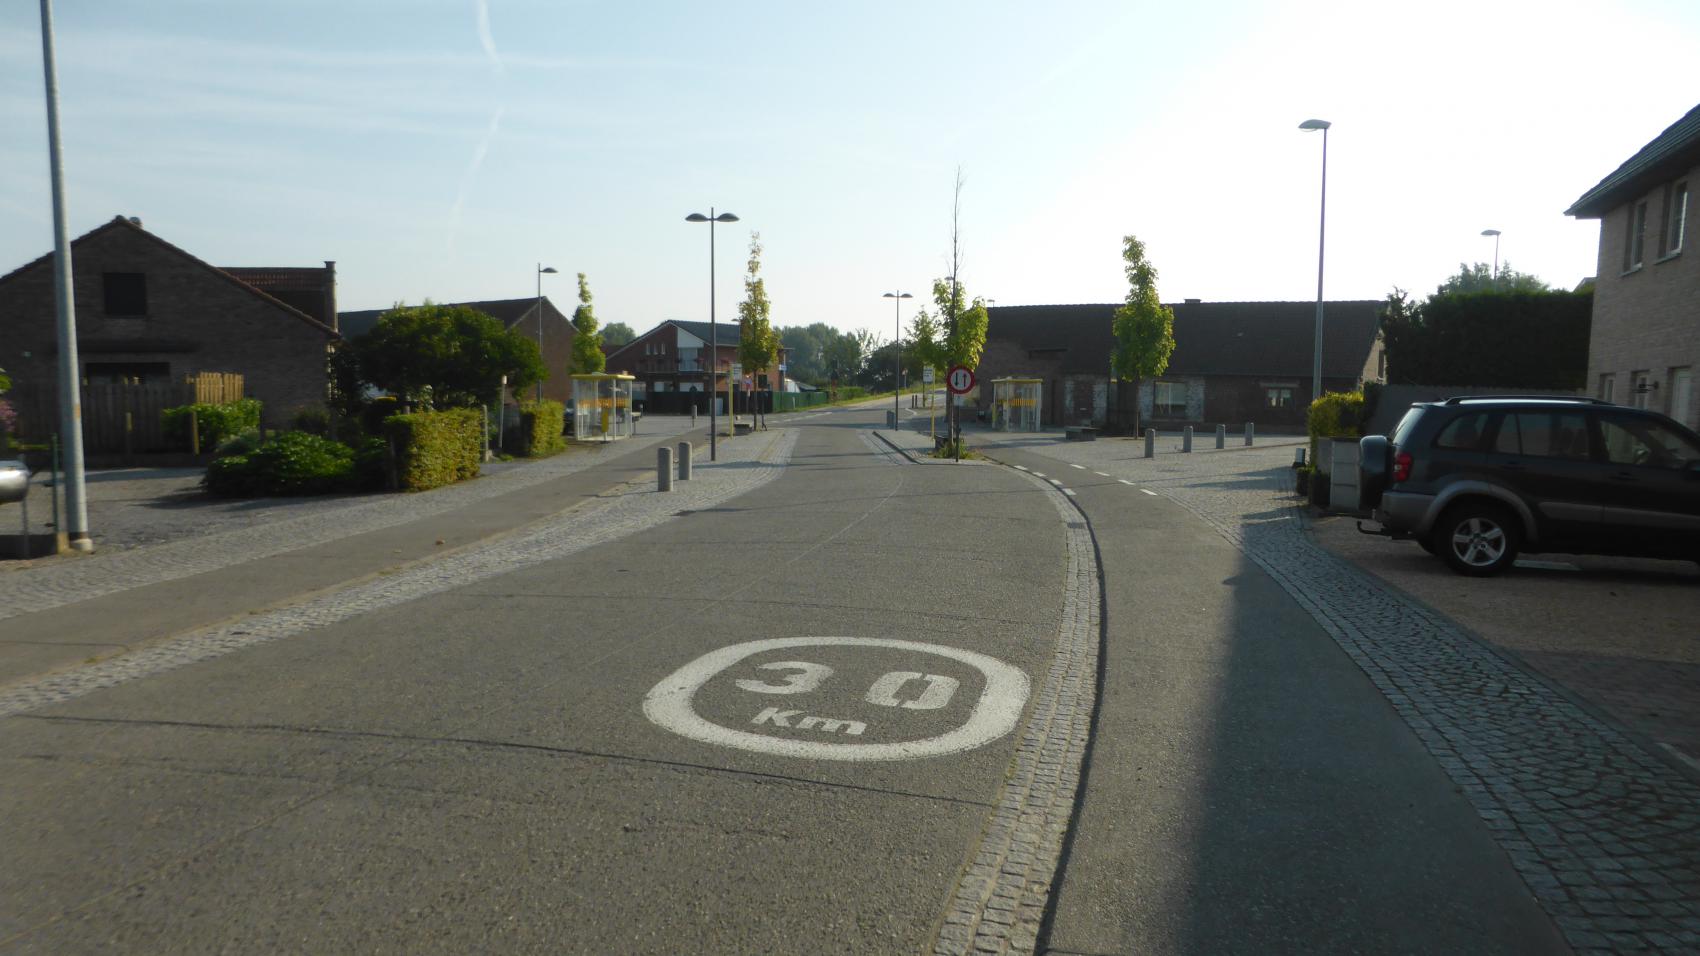 Bus stop Kerkstraat on Lodewijk van Veltemstraat in Beisem. Carriageway narrowed to one lane to provide extra space for passengers entering or leaving the bus without interrupting the cycle traffic.